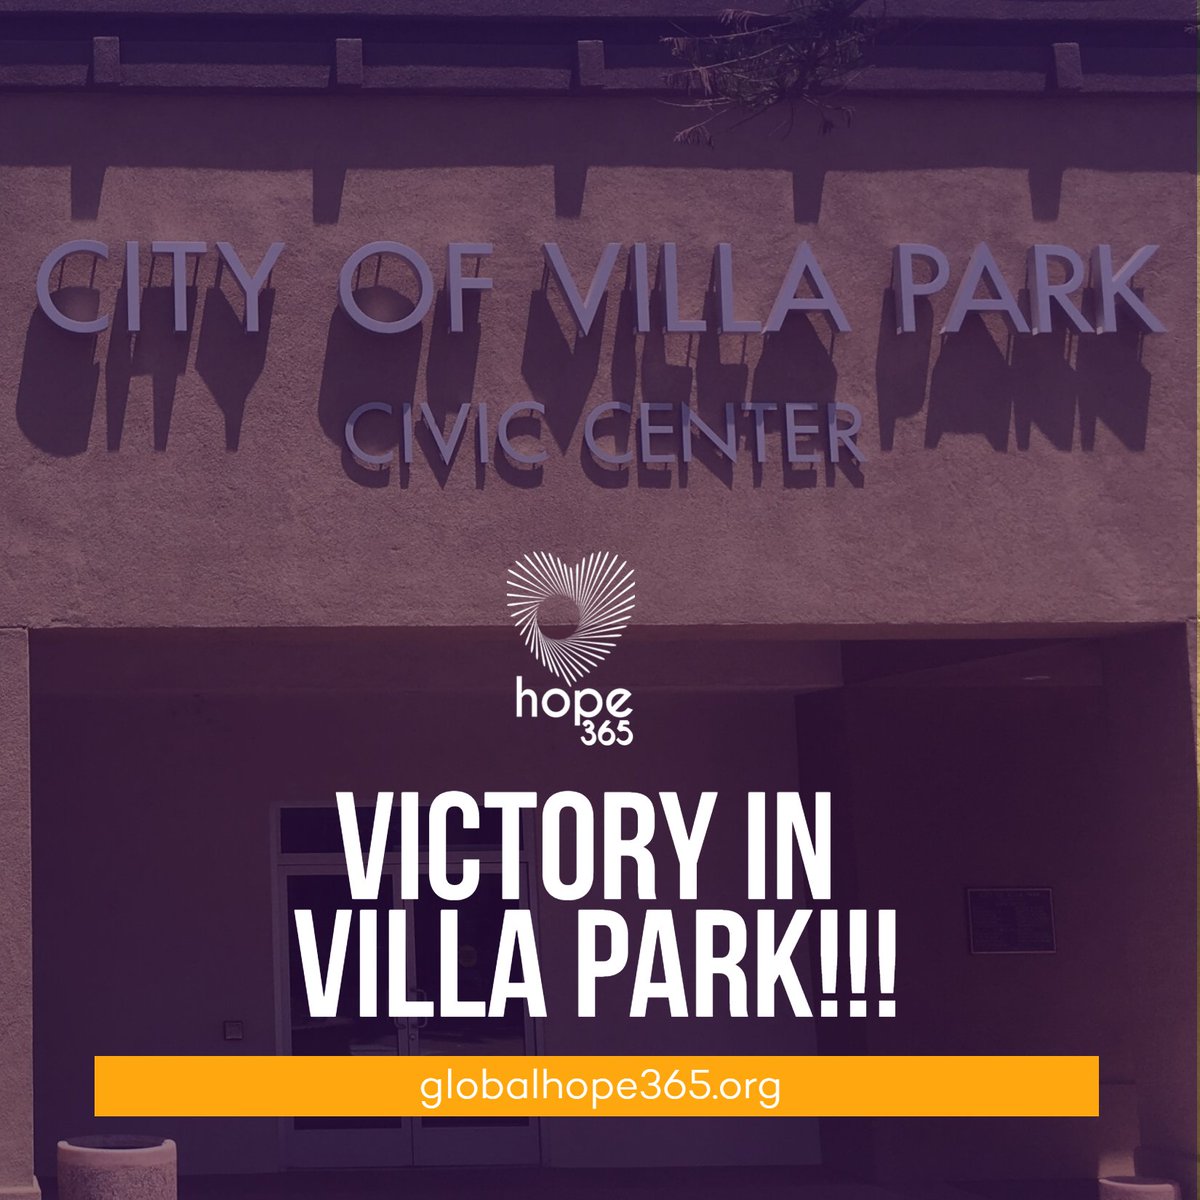 Villa Park just passed our resolution to End Child Marriage under 18, no Exceptions!!! Thank You Mayor Chad Zimmerman for your leadership. That makes Villa Park the 13th city in Orange County that has passed our resolution.

globalhope365.org 

#EarlyGiving #Donate